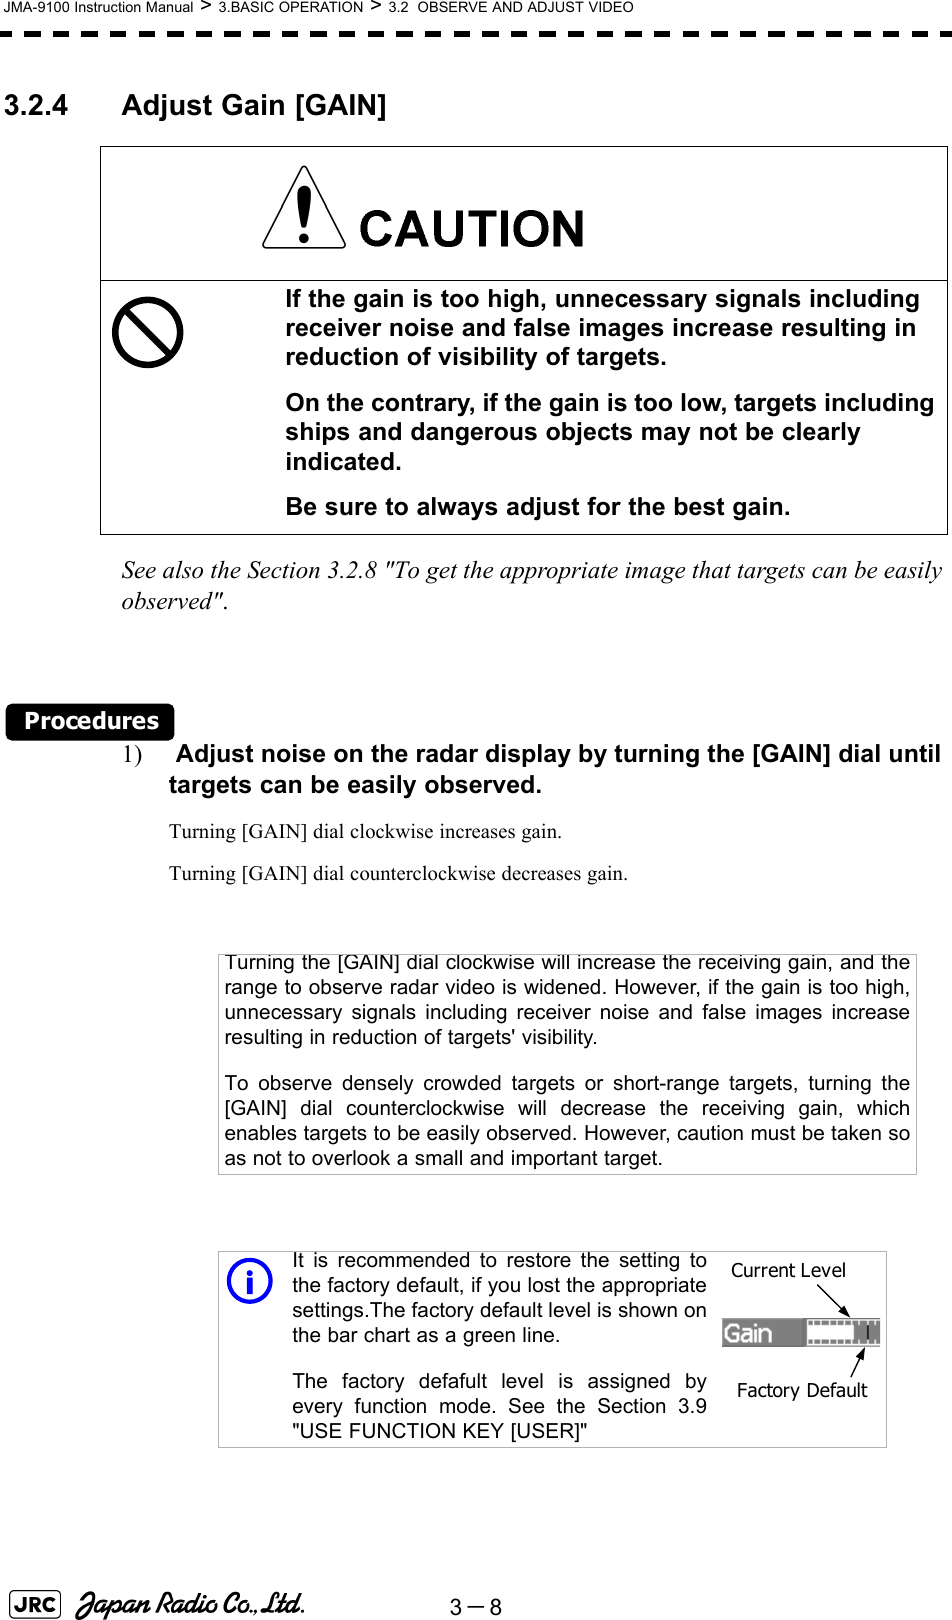 3－8JMA-9100 Instruction Manual &gt; 3.BASIC OPERATION &gt; 3.2  OBSERVE AND ADJUST VIDEO3.2.4 Adjust Gain [GAIN] See also the Section 3.2.8 &quot;To get the appropriate image that targets can be easily observed&quot;.Procedures1)  Adjust noise on the radar display by turning the [GAIN] dial until targets can be easily observed.Turning [GAIN] dial clockwise increases gain.Turning [GAIN] dial counterclockwise decreases gain.If the gain is too high, unnecessary signals including receiver noise and false images increase resulting in reduction of visibility of targets.On the contrary, if the gain is too low, targets including ships and dangerous objects may not be clearly indicated.Be sure to always adjust for the best gain.Turning the [GAIN] dial clockwise will increase the receiving gain, and therange to observe radar video is widened. However, if the gain is too high,unnecessary signals including receiver noise and false images increaseresulting in reduction of targets&apos; visibility.To observe densely crowded targets or short-range targets, turning the[GAIN] dial counterclockwise will decrease the receiving gain, whichenables targets to be easily observed. However, caution must be taken soas not to overlook a small and important target.iIt is recommended to restore the setting tothe factory default, if you lost the appropriatesettings.The factory default level is shown onthe bar chart as a green line. The factory defafult level is assigned byevery function mode. See the Section 3.9&quot;USE FUNCTION KEY [USER]&quot;Current LevelFactory Default